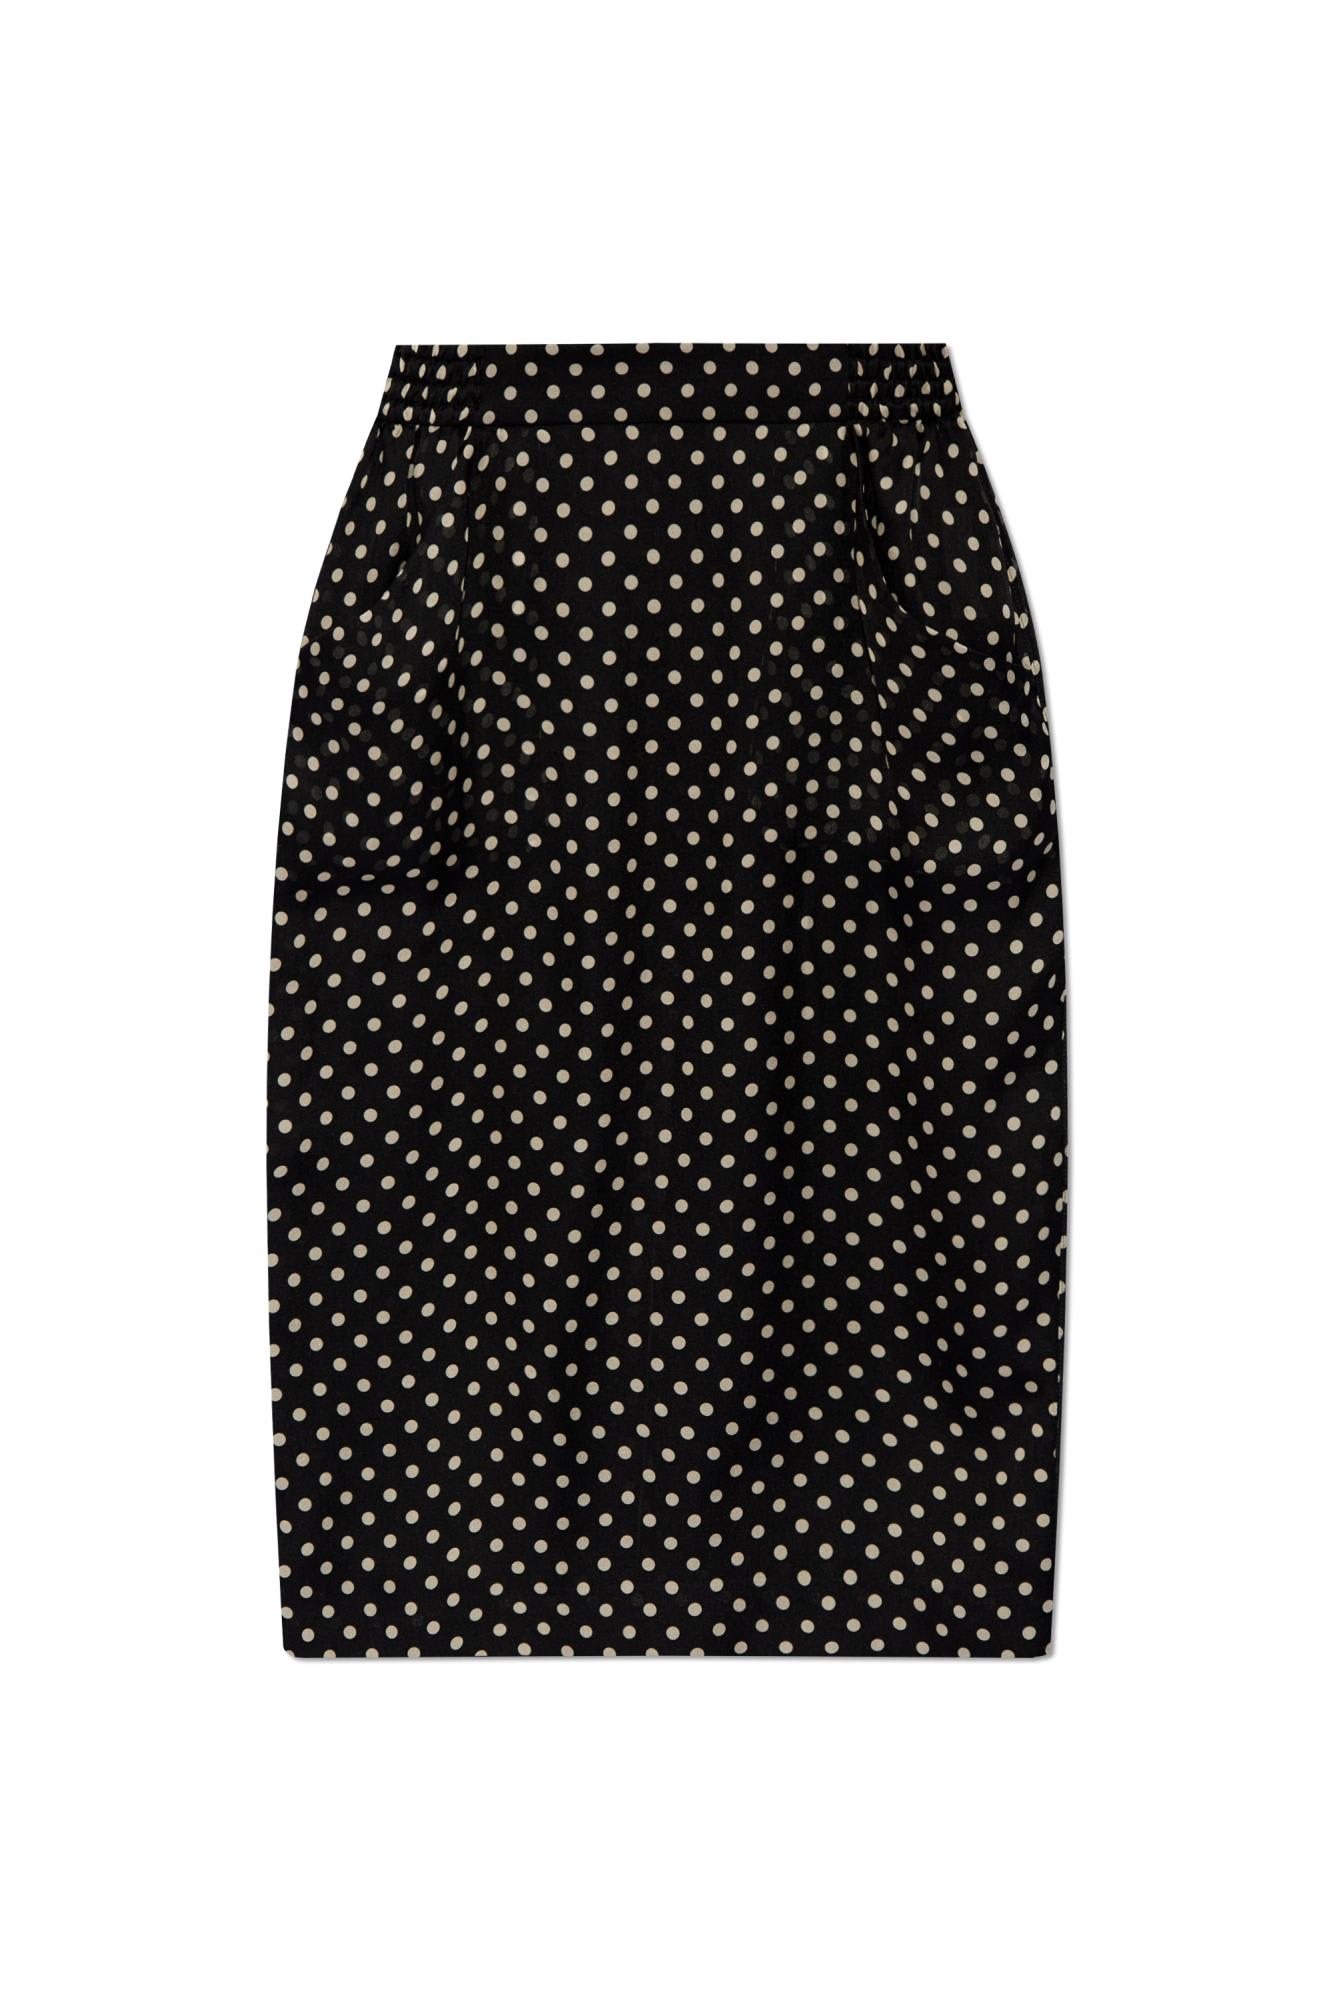 Dotted Print Skirt